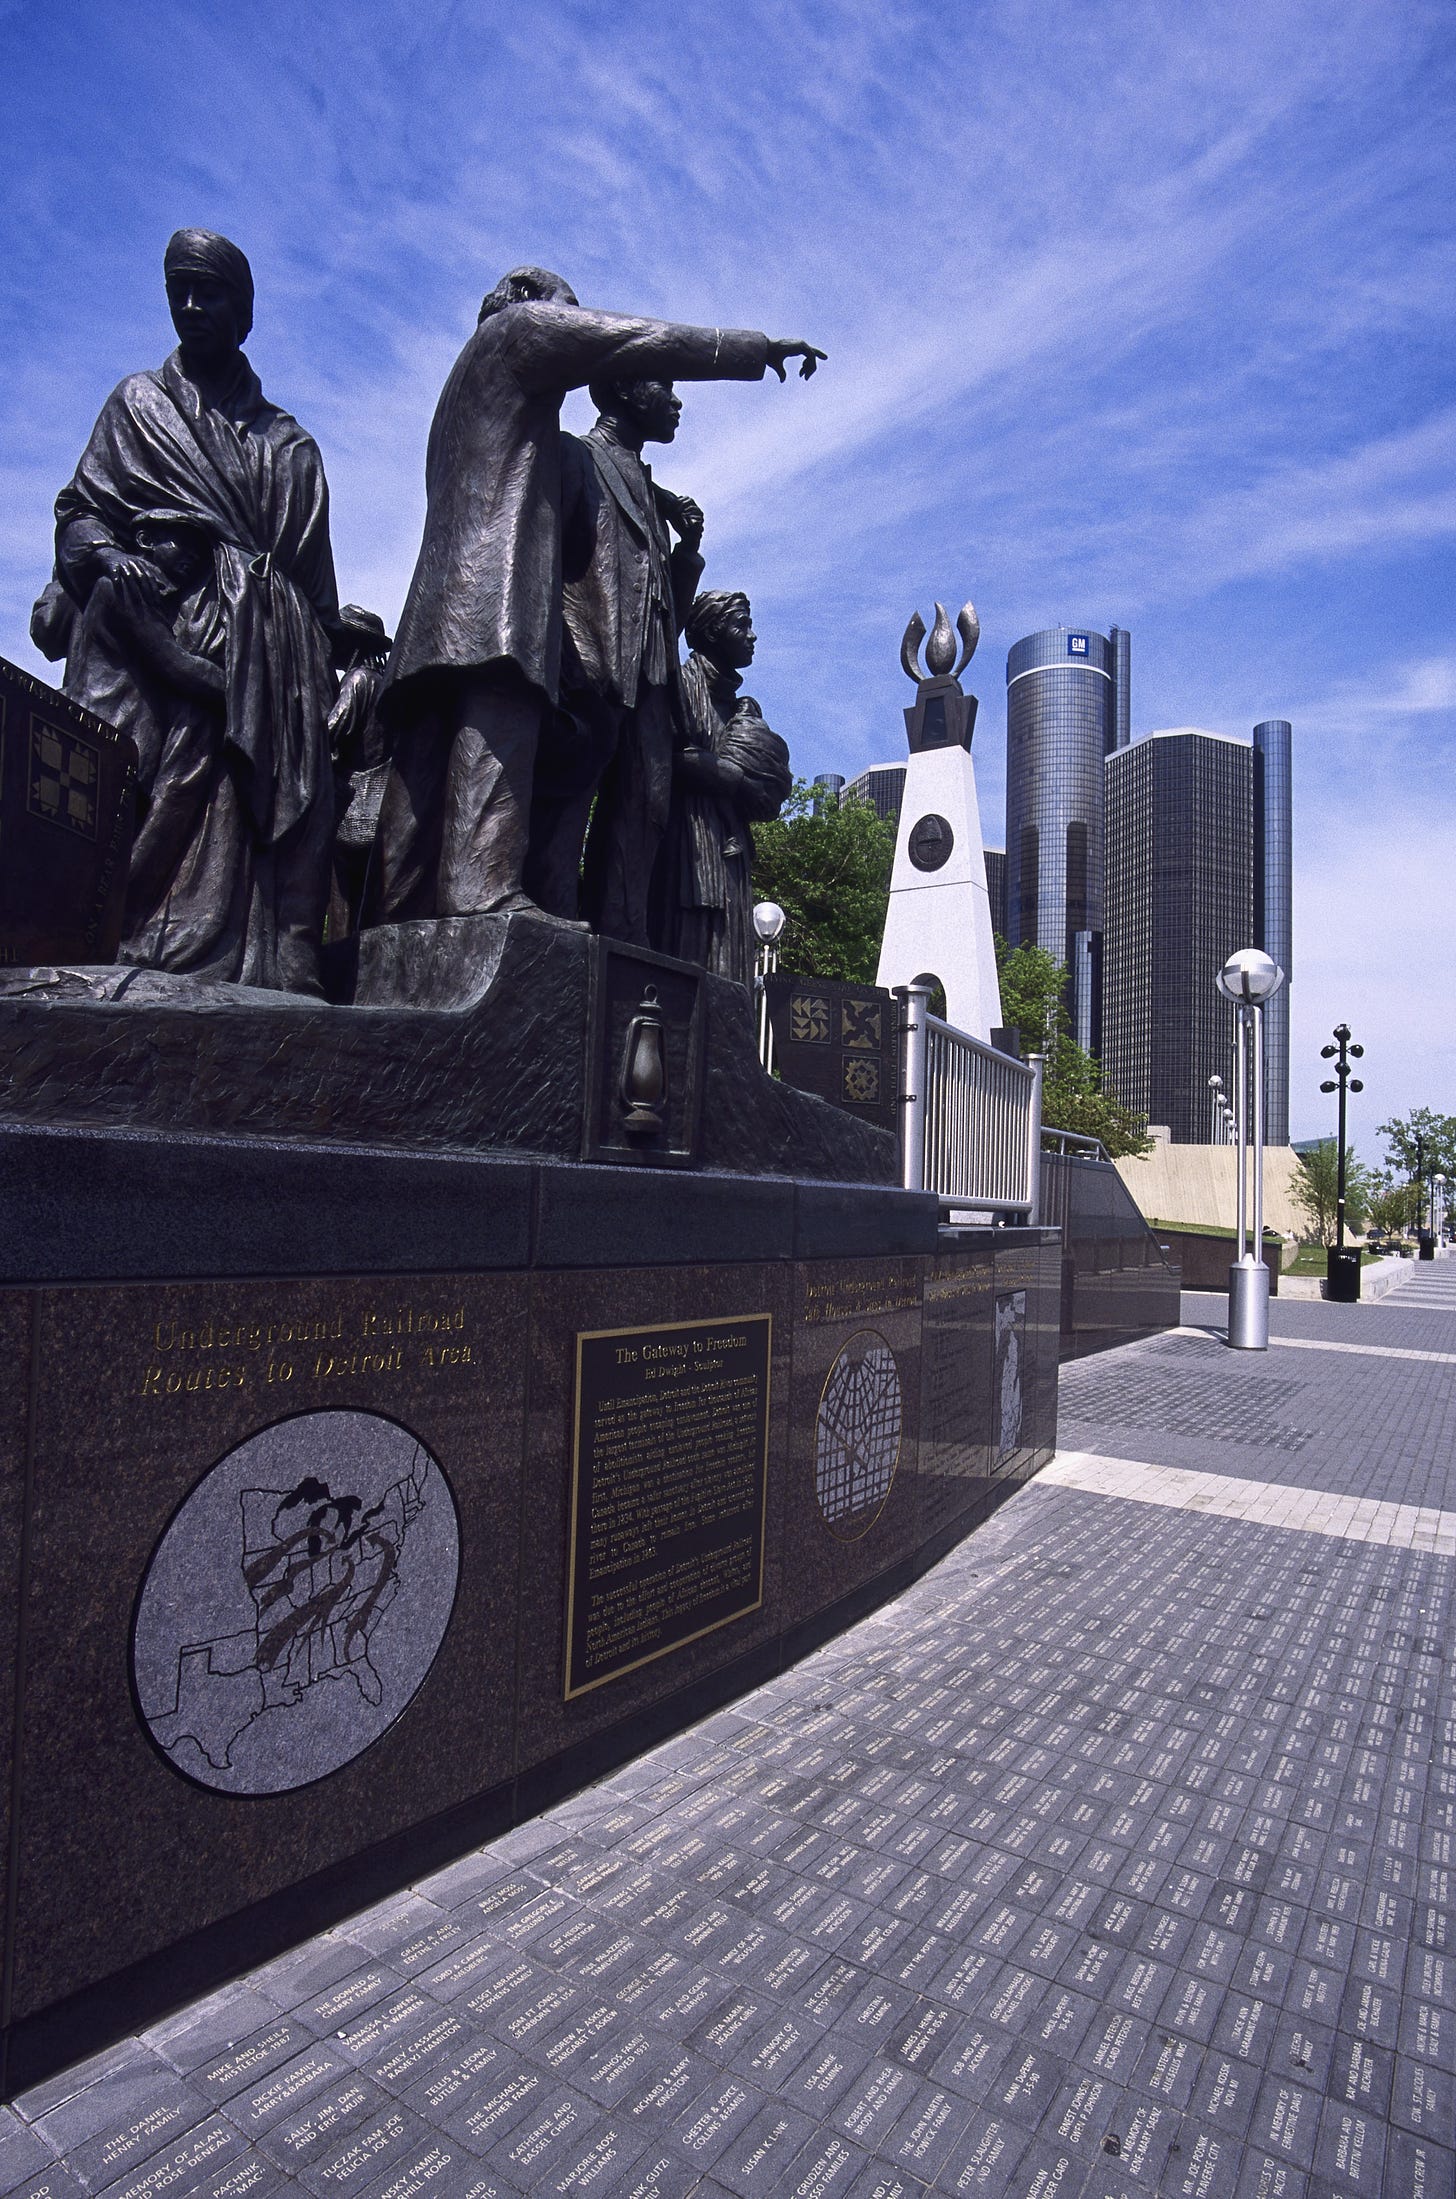 Gateway to Freedom Statue depicting freed slaves about to cross the Detroit River into Canada The story it accompanies takes place near the statue but isn't about slavery,just friendship